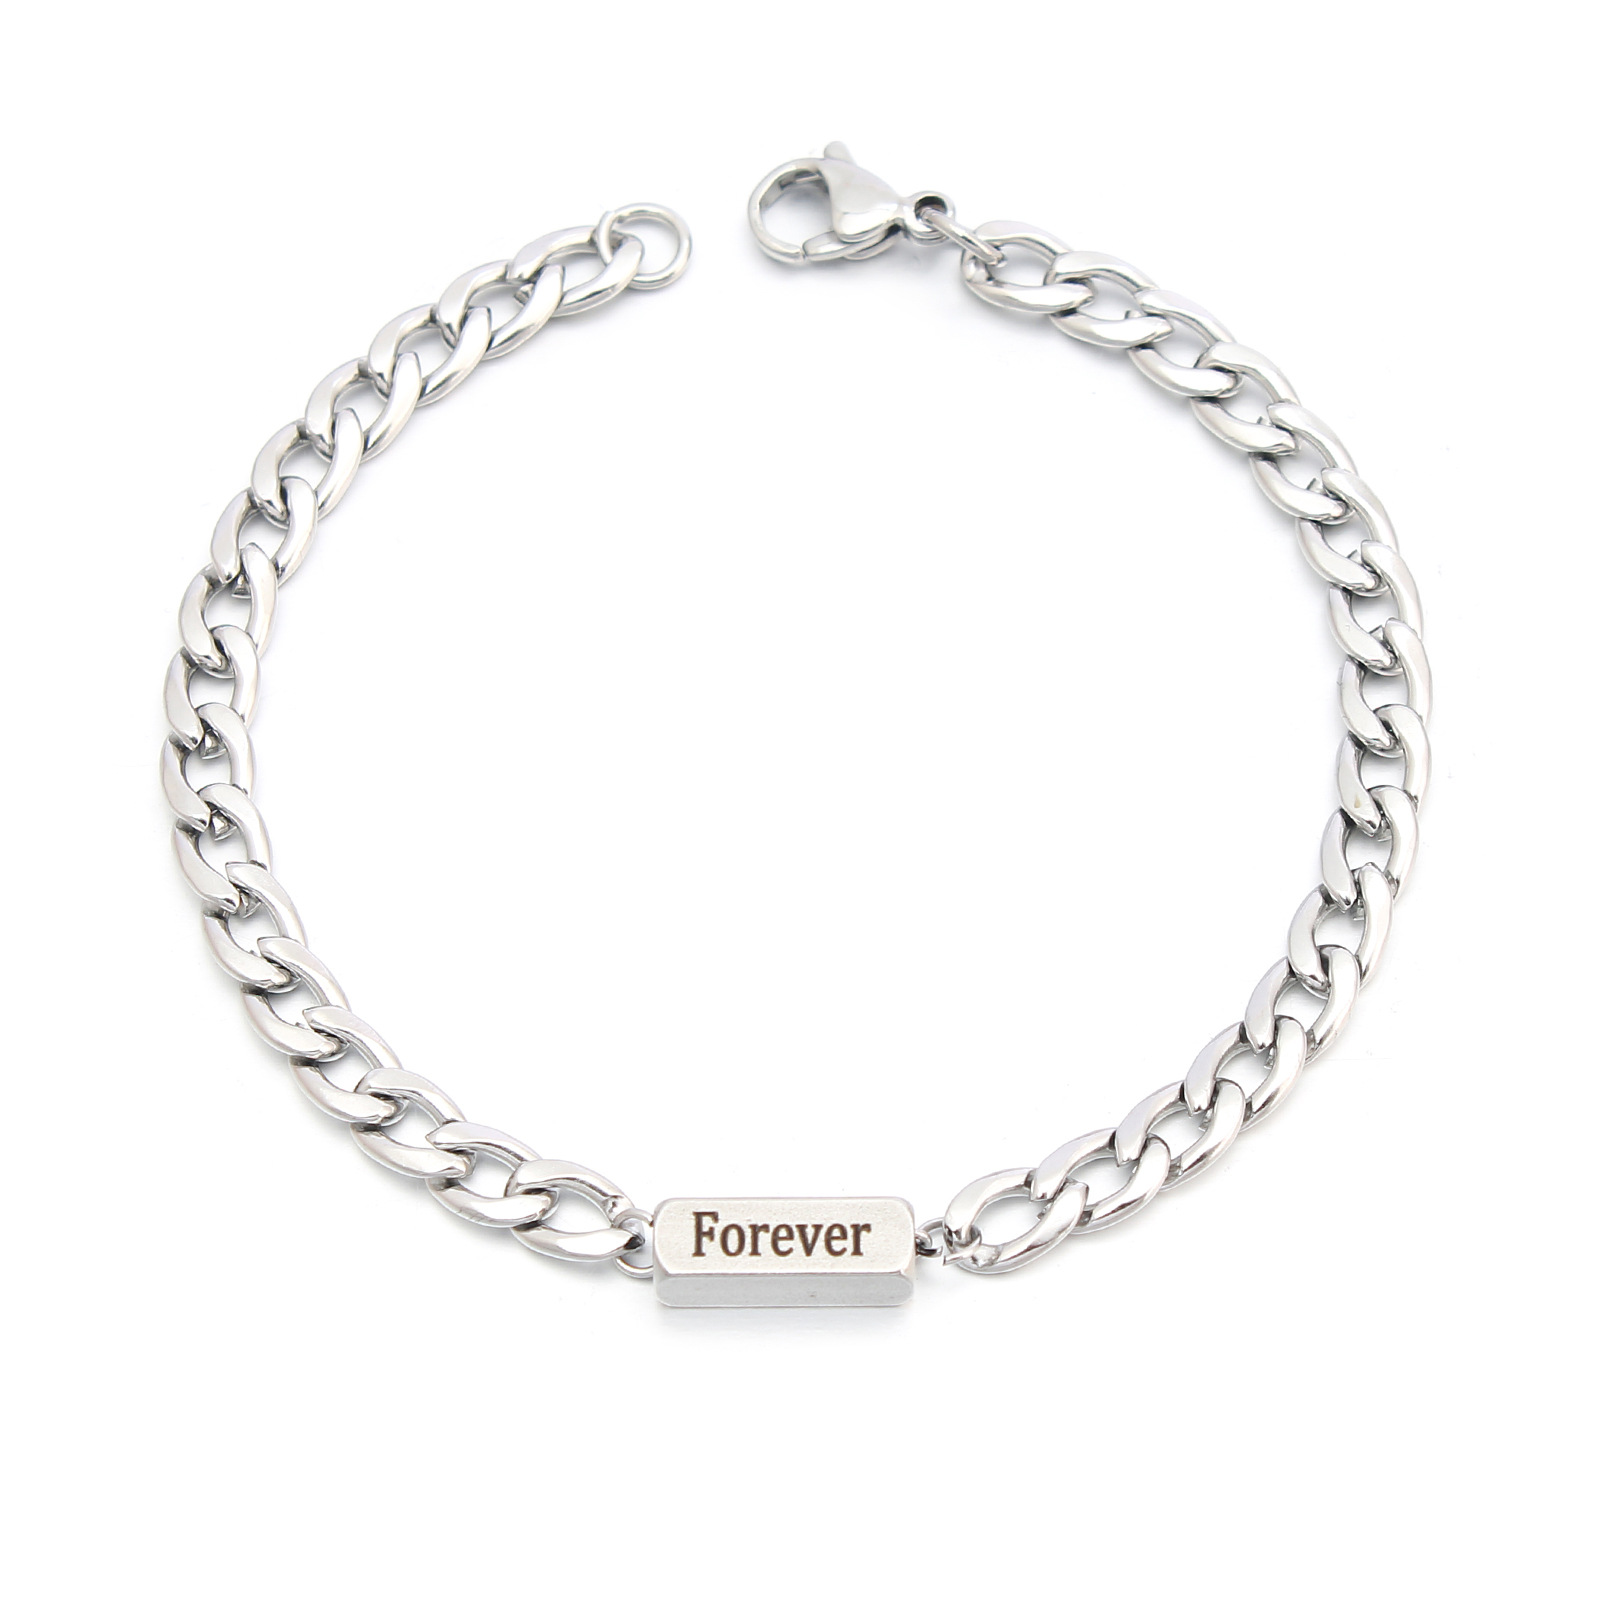 5:Foreve engraved Cuban chain single